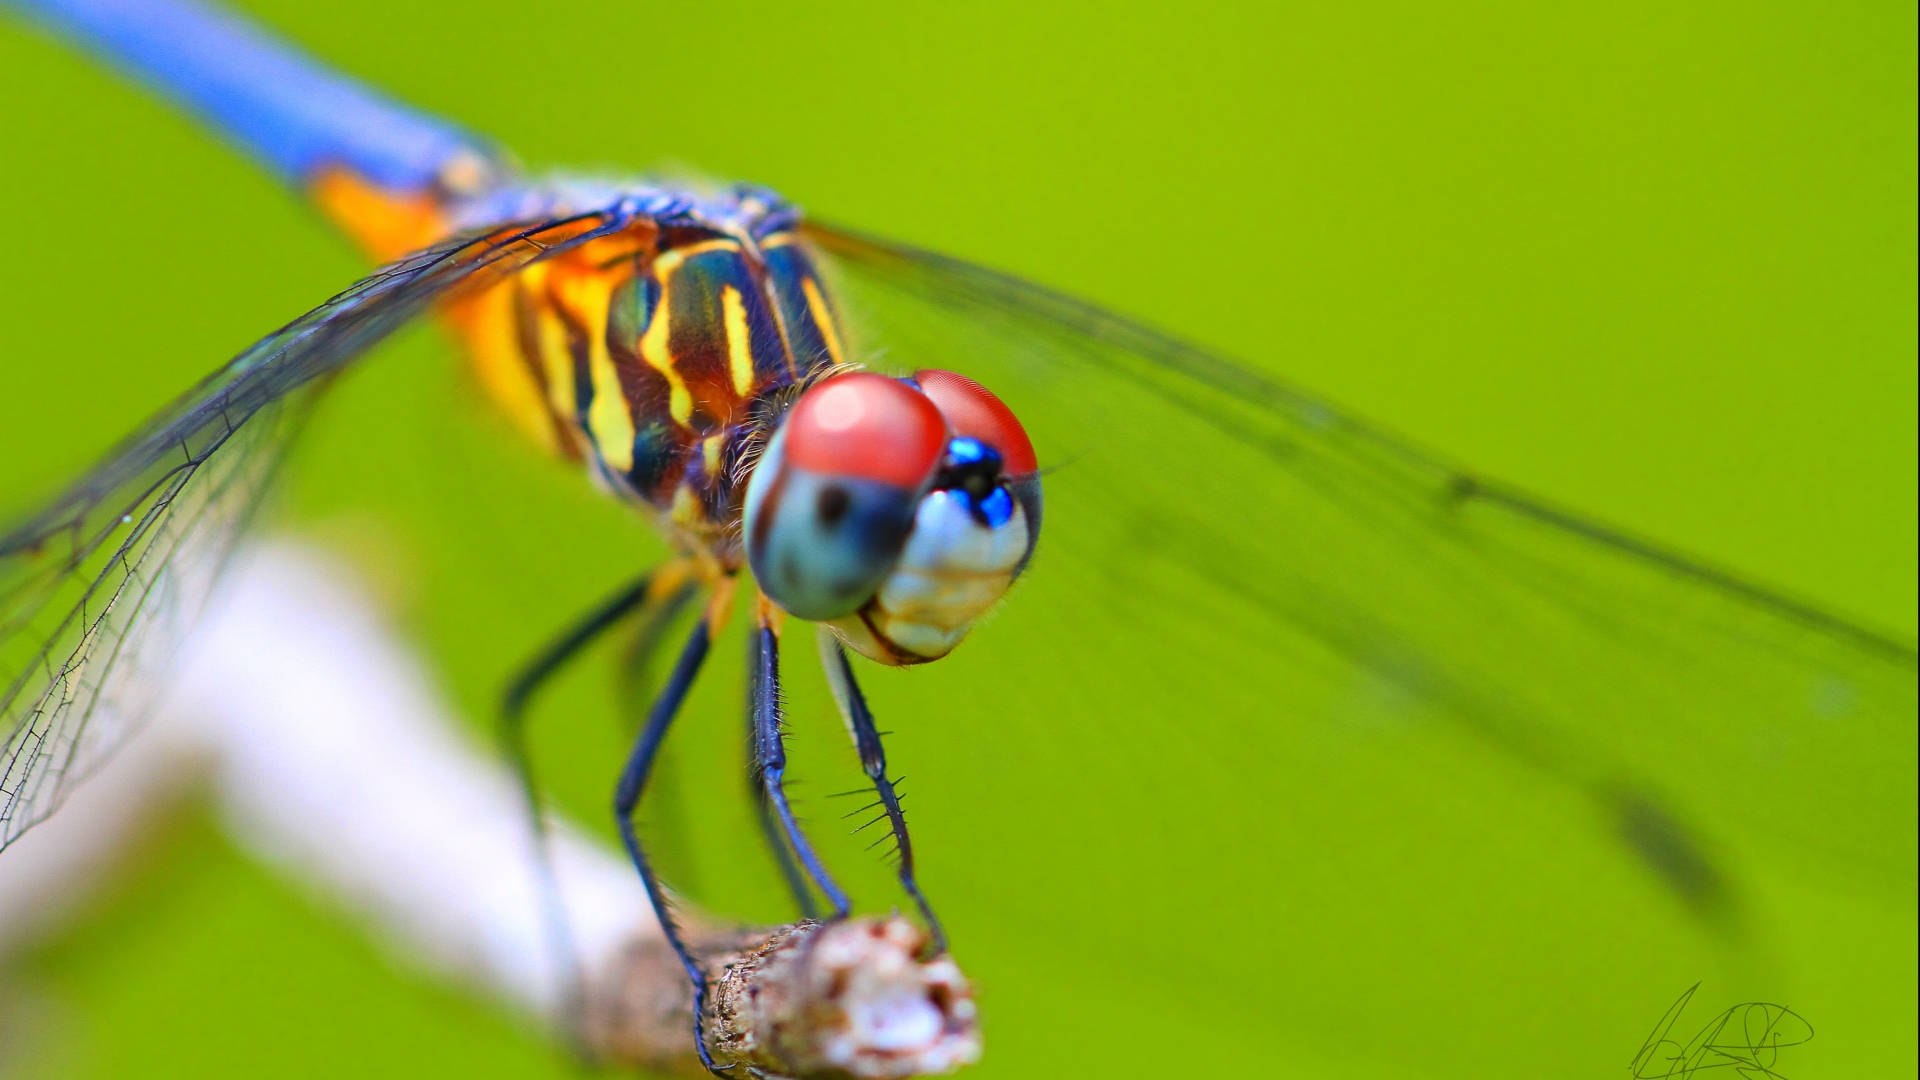 Cute Smiling Dragonfly Wallpaper